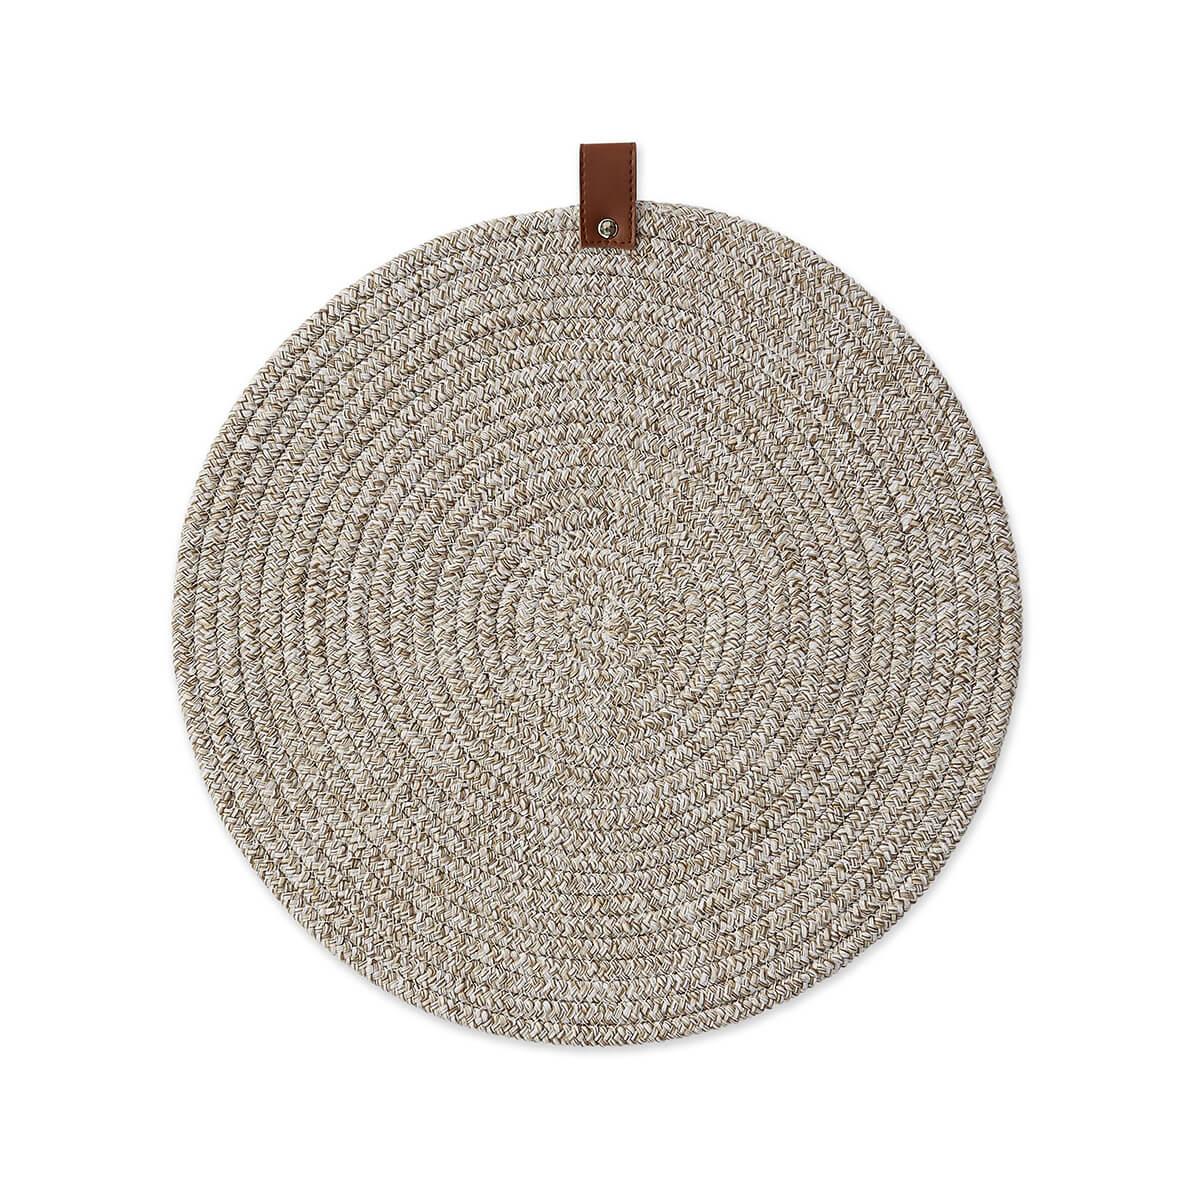  Green House Earth Round Placemat